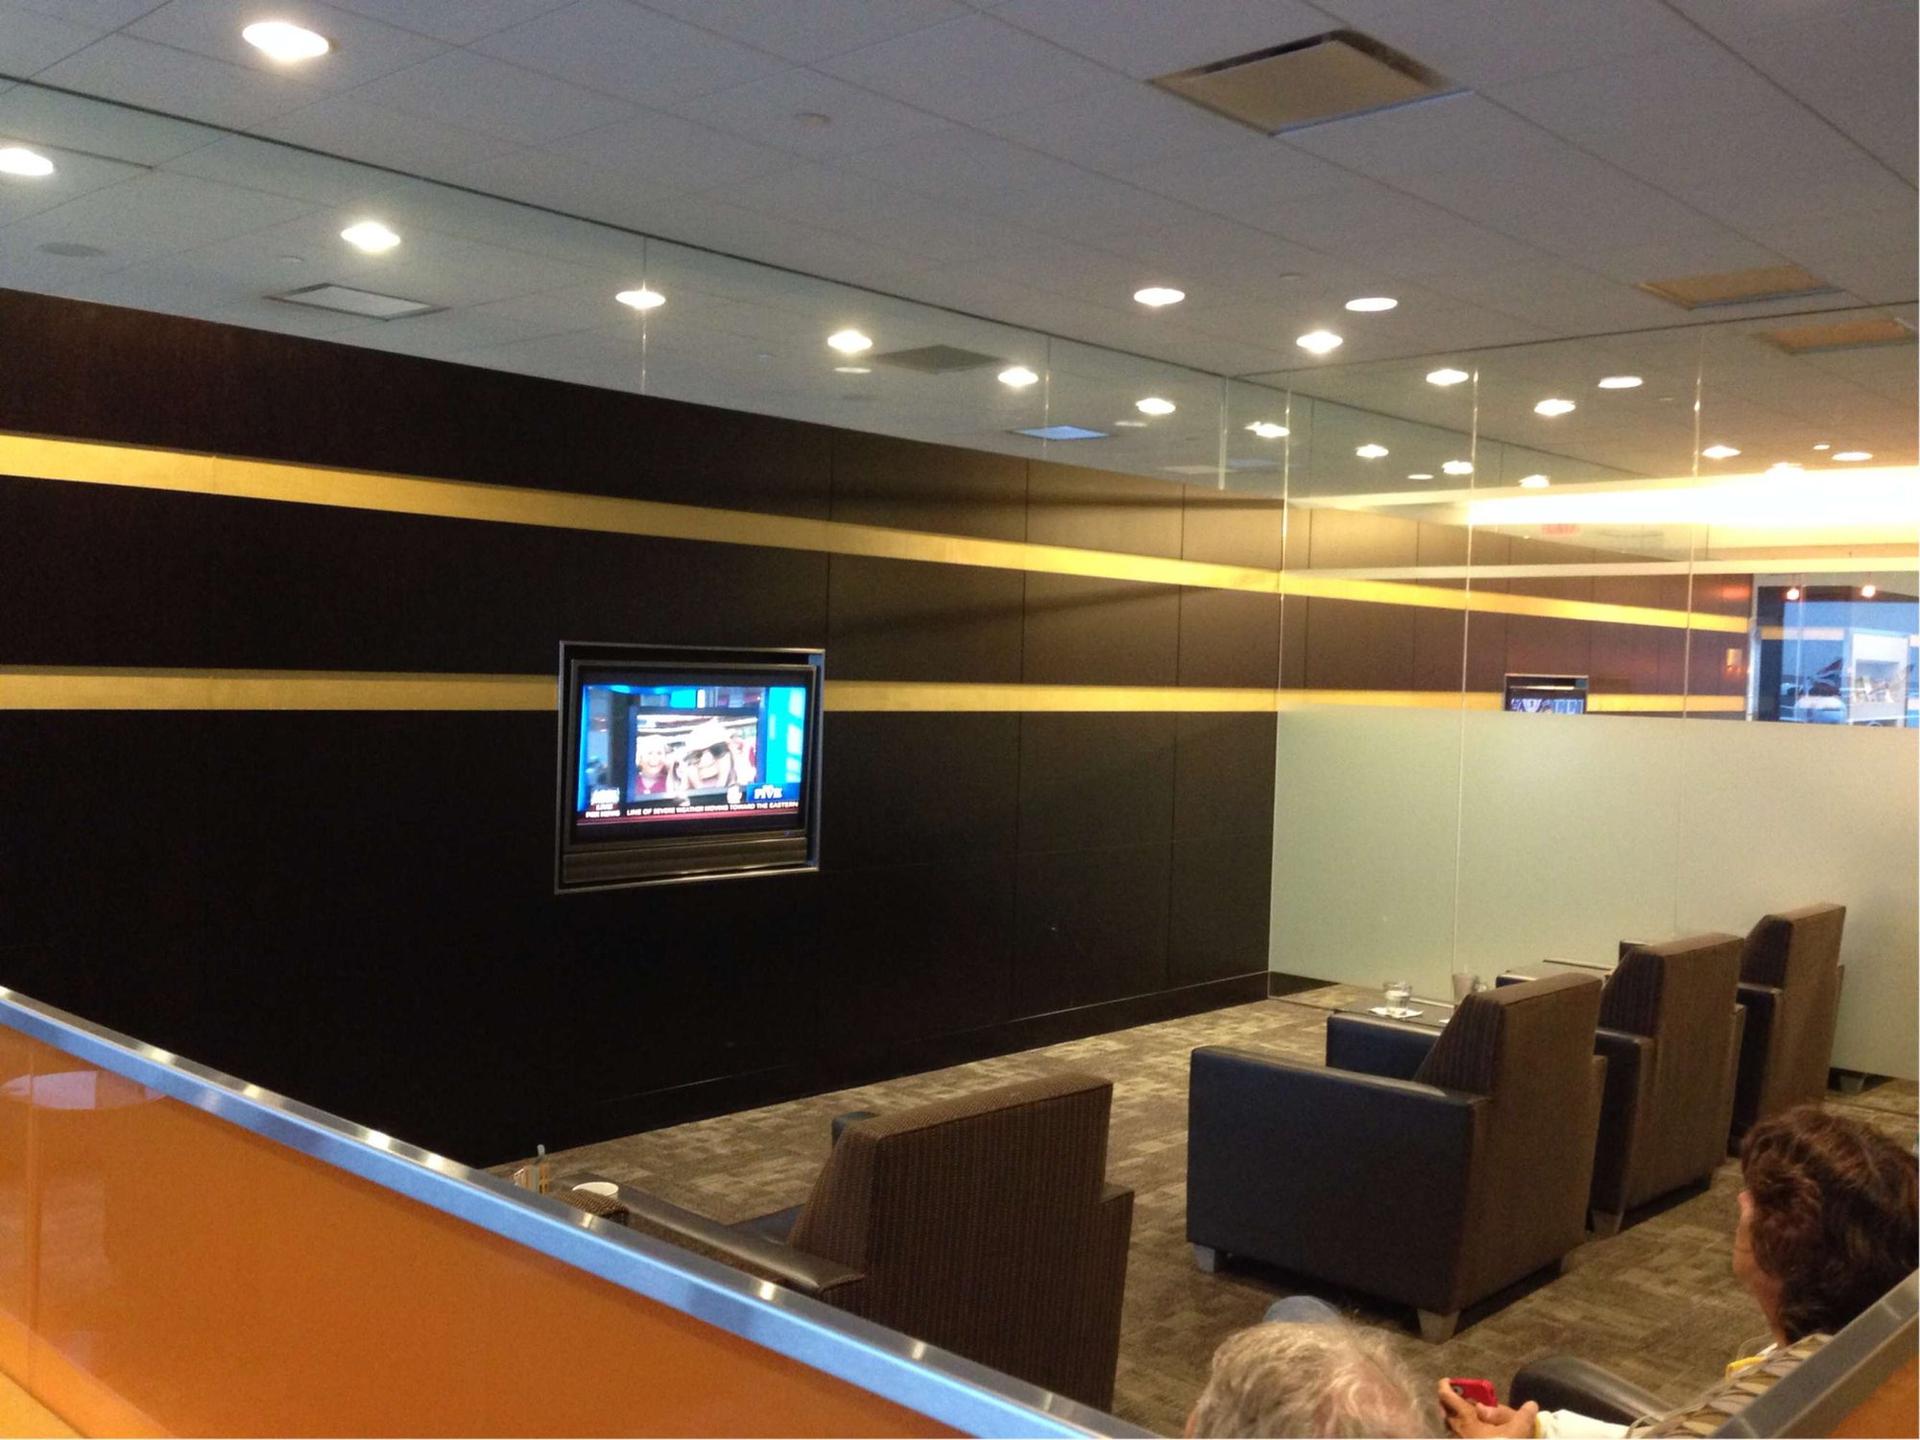 American Airlines Admirals Club image 5 of 25